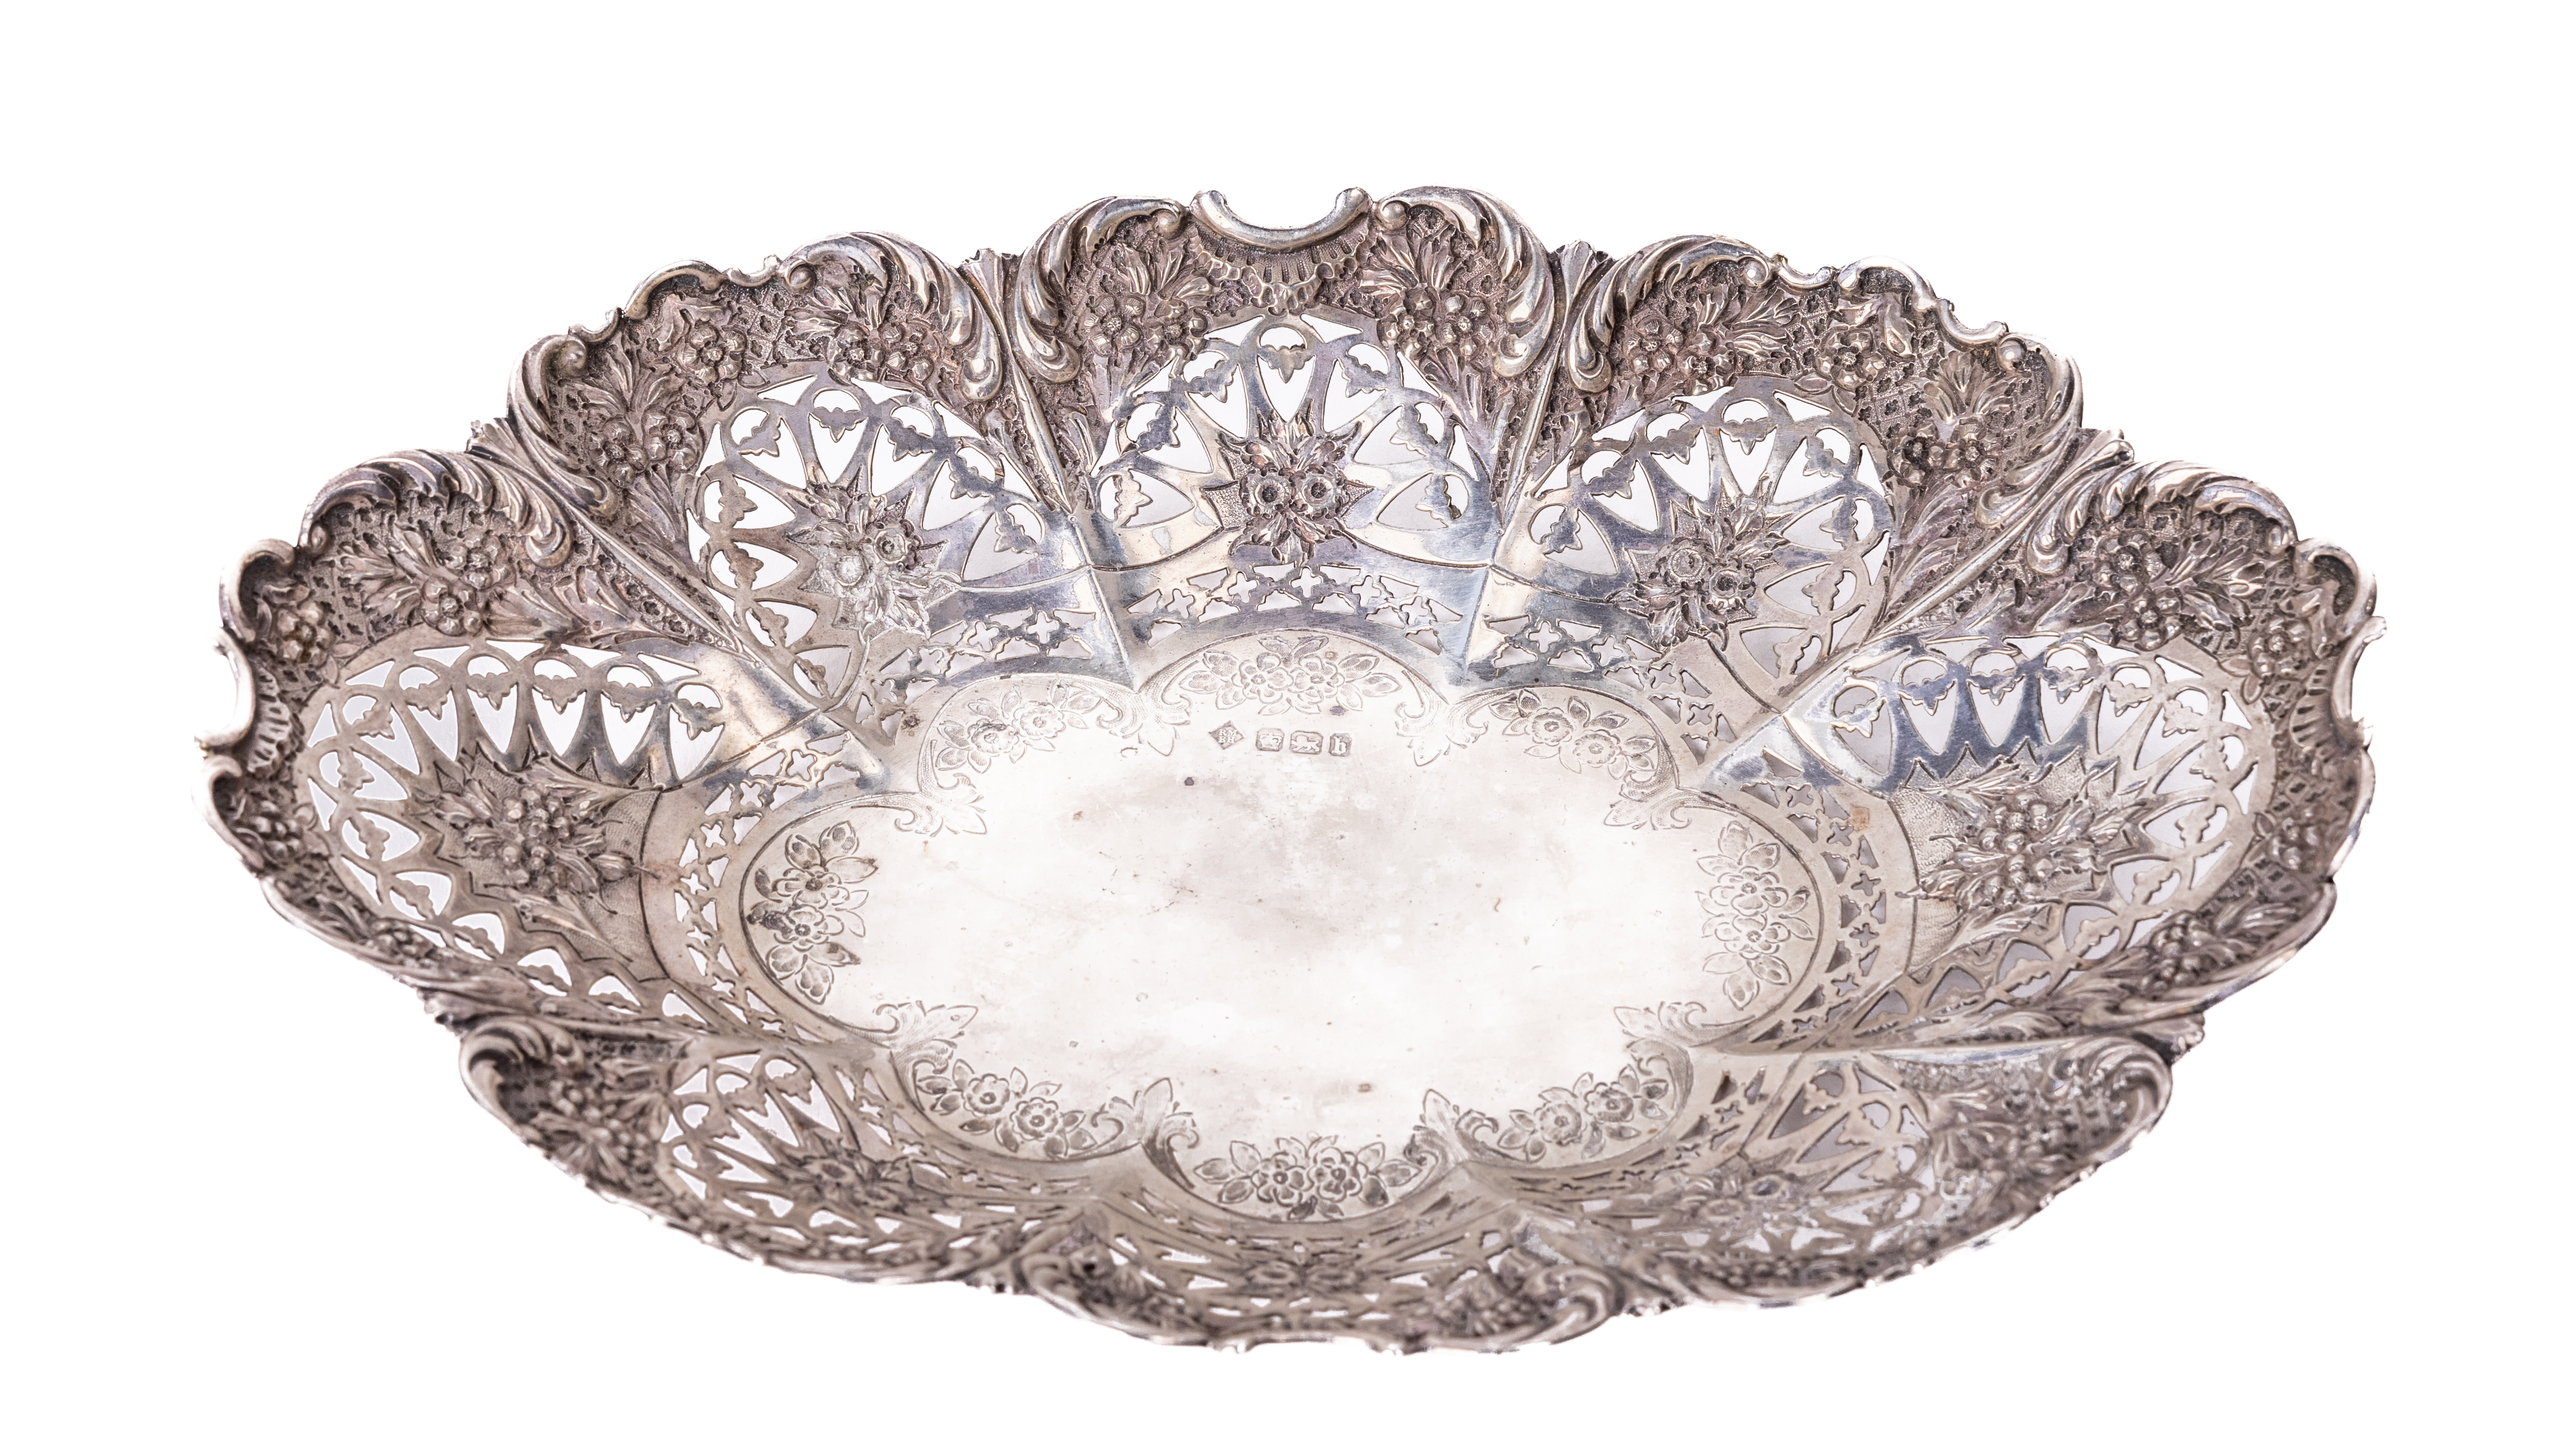 A fine quality English Victorian oval pierced and decorated silver Fruit Dish, with ornate floral